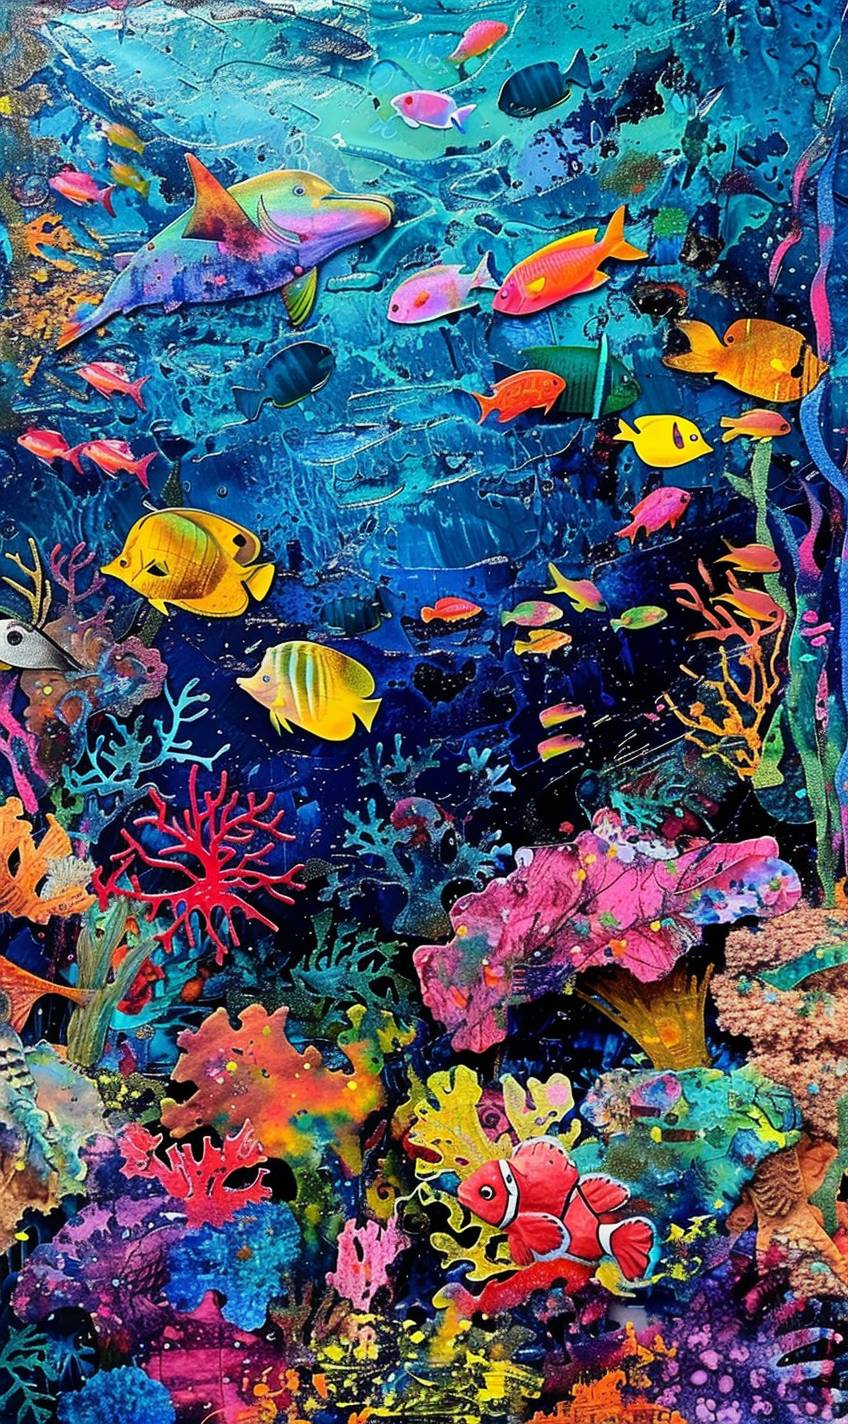 A vibrant underwater coral reef, teeming with colorful fish and marine life by Herman Brood